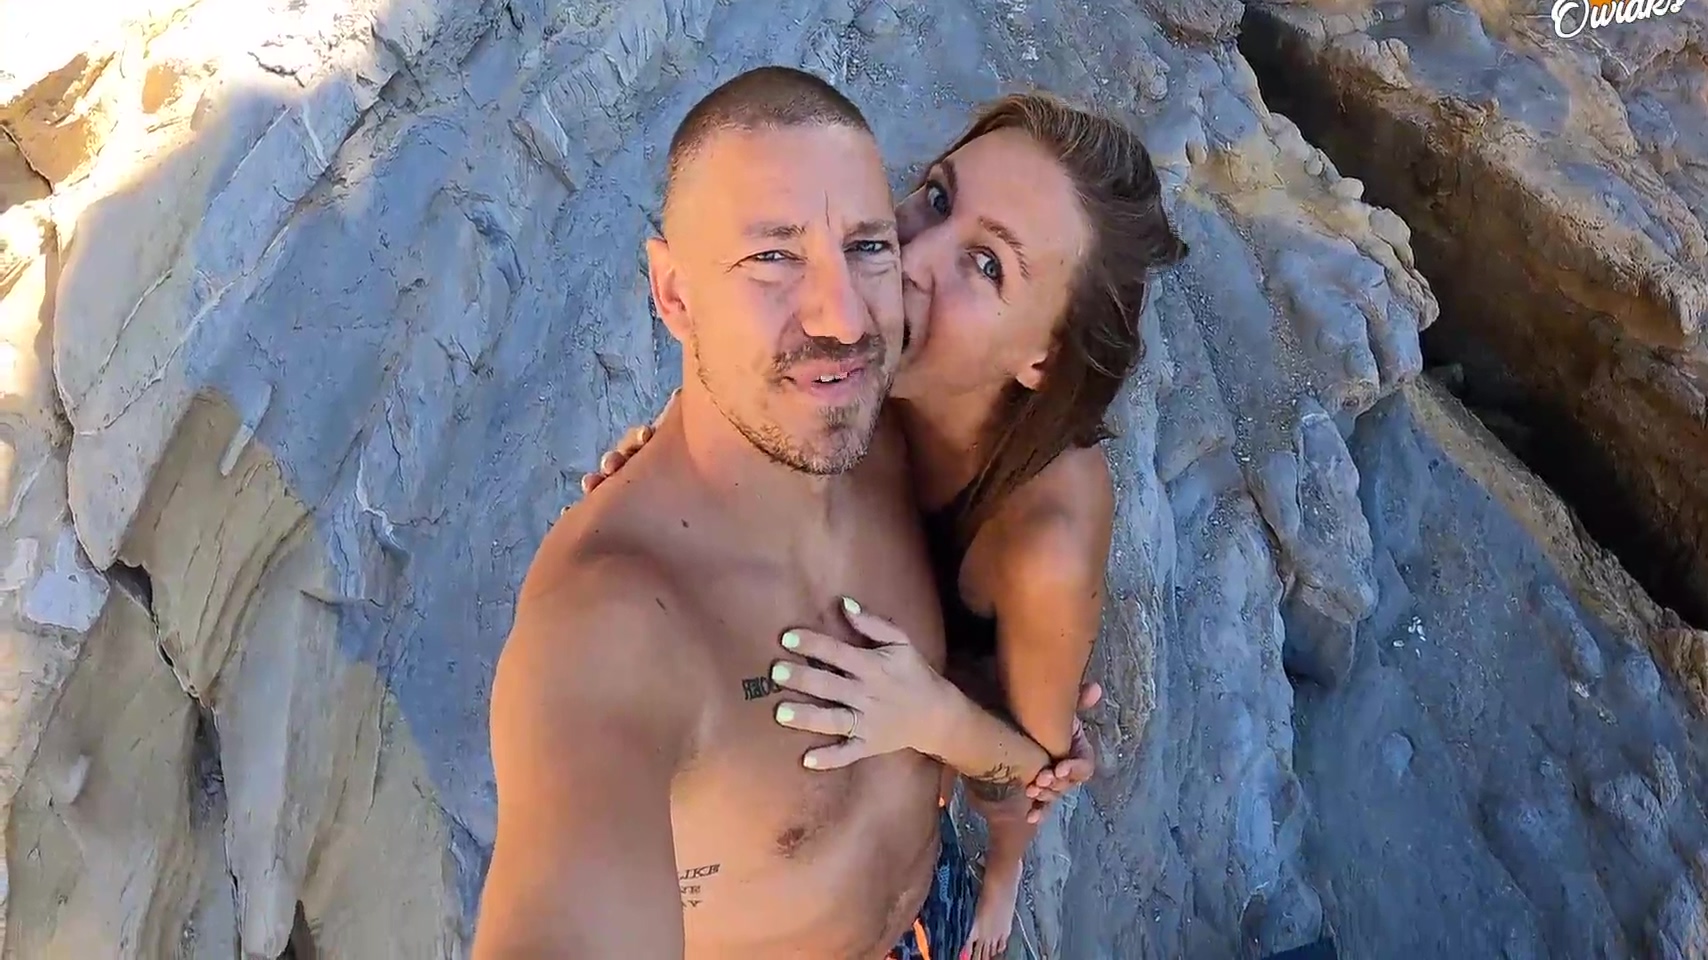 Mateo Owiak, Owiaks And Yuli Owiak In Go Wild! Pov Fucking In A Cave On The Spanish Coast 8 Min - Video Free Porn Videos image